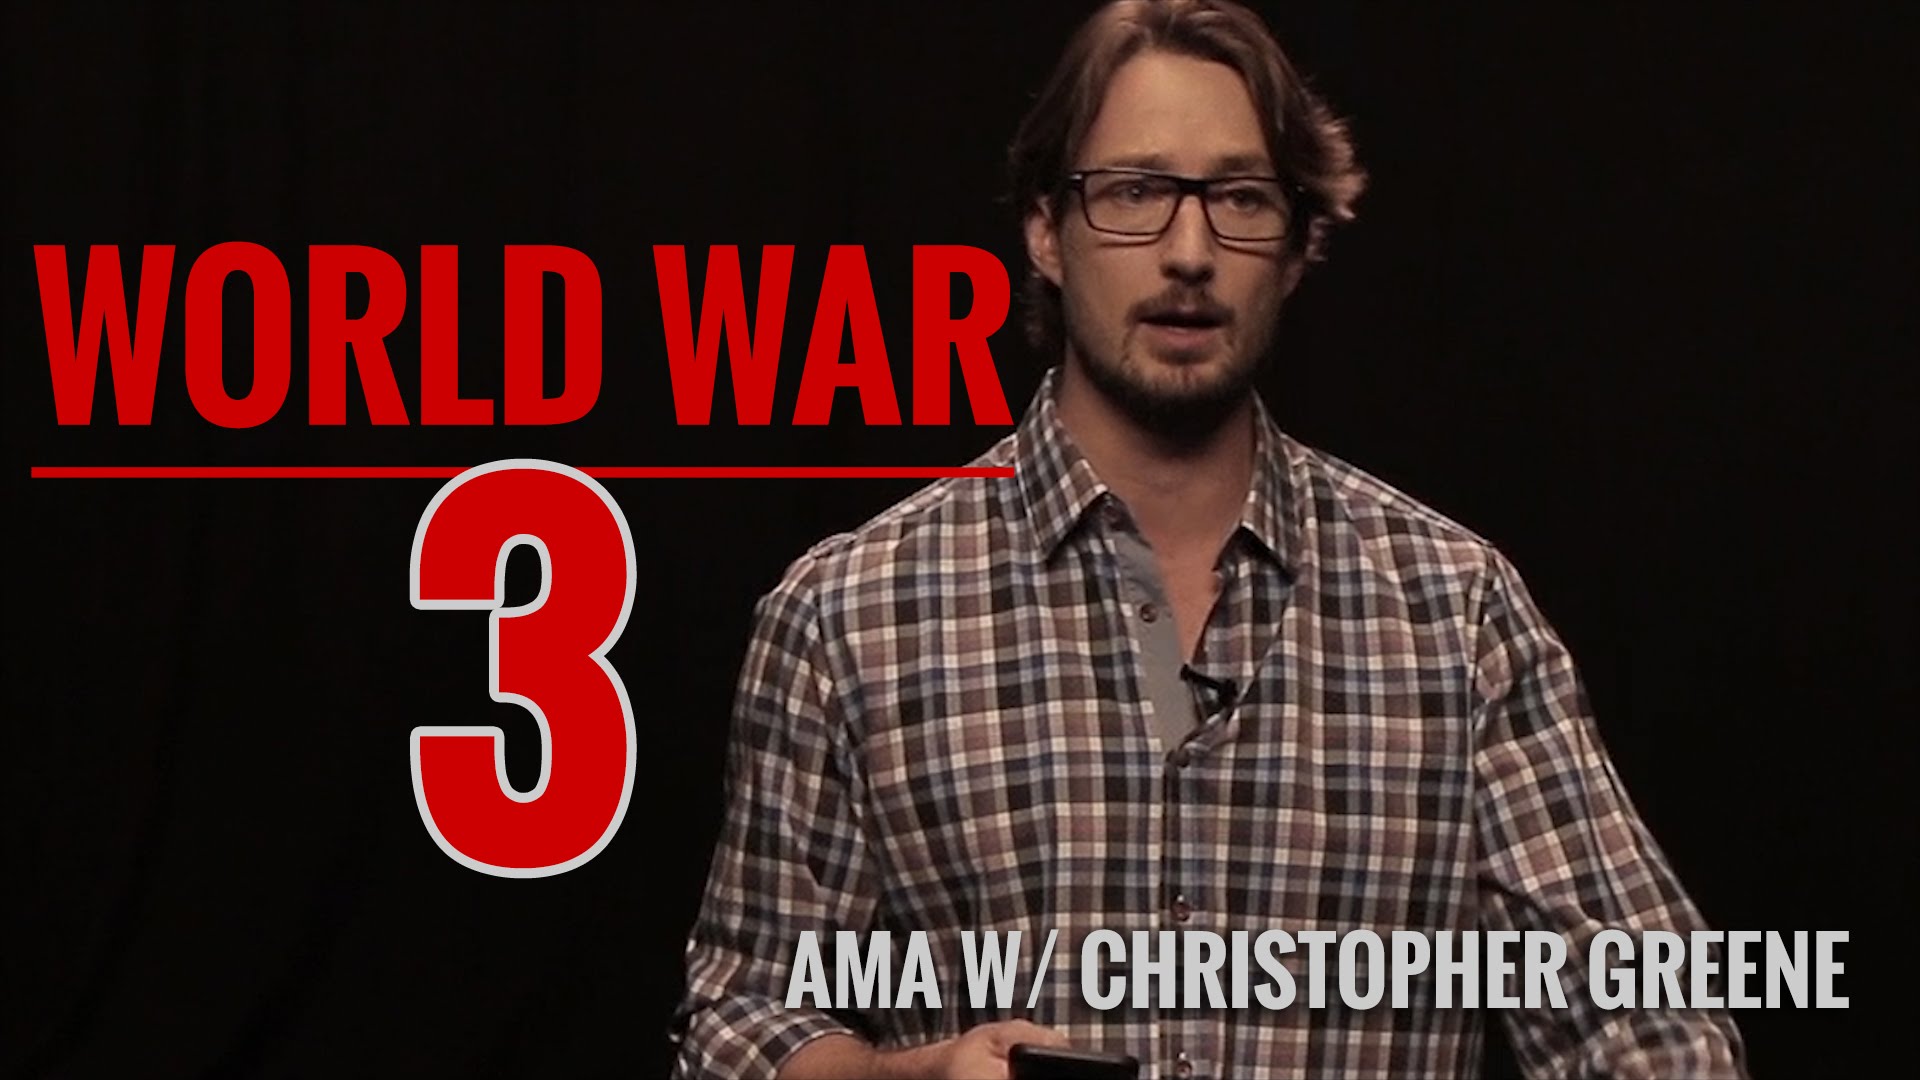 World War 3 Will Be the Reset Button: “AMA w/ Christopher Greene 5/5/15”